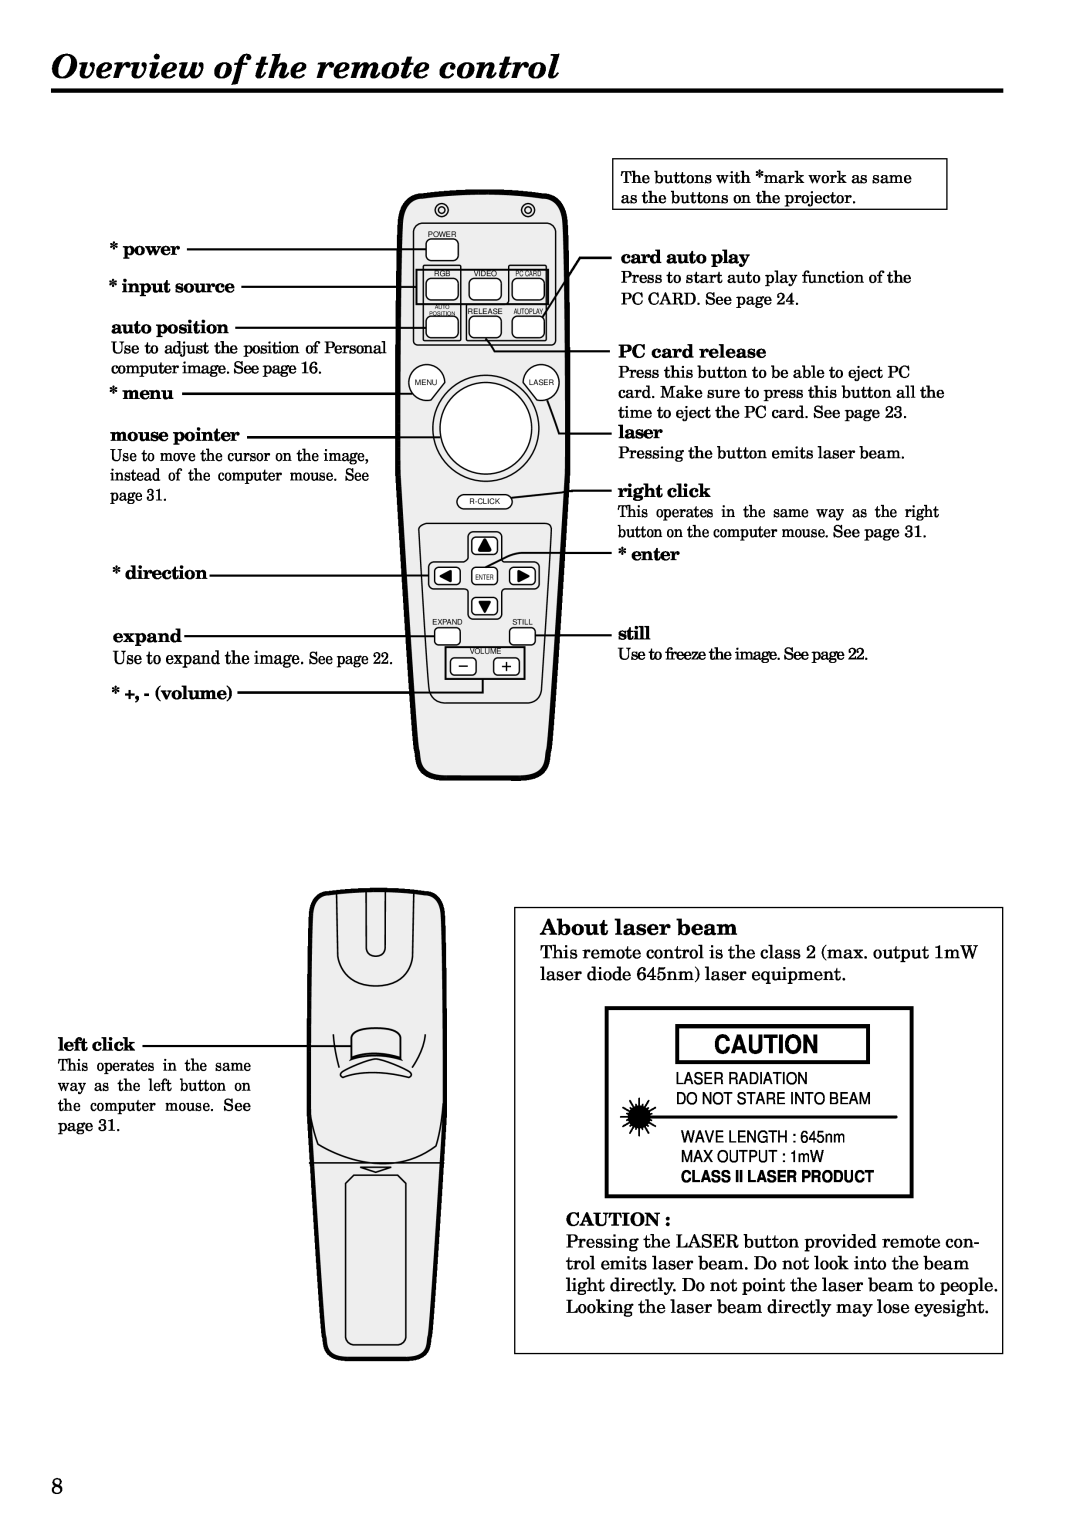 Mitsubishi Electronics LVP-X120A Overview of the remote control, About laser beam, power input source auto position 